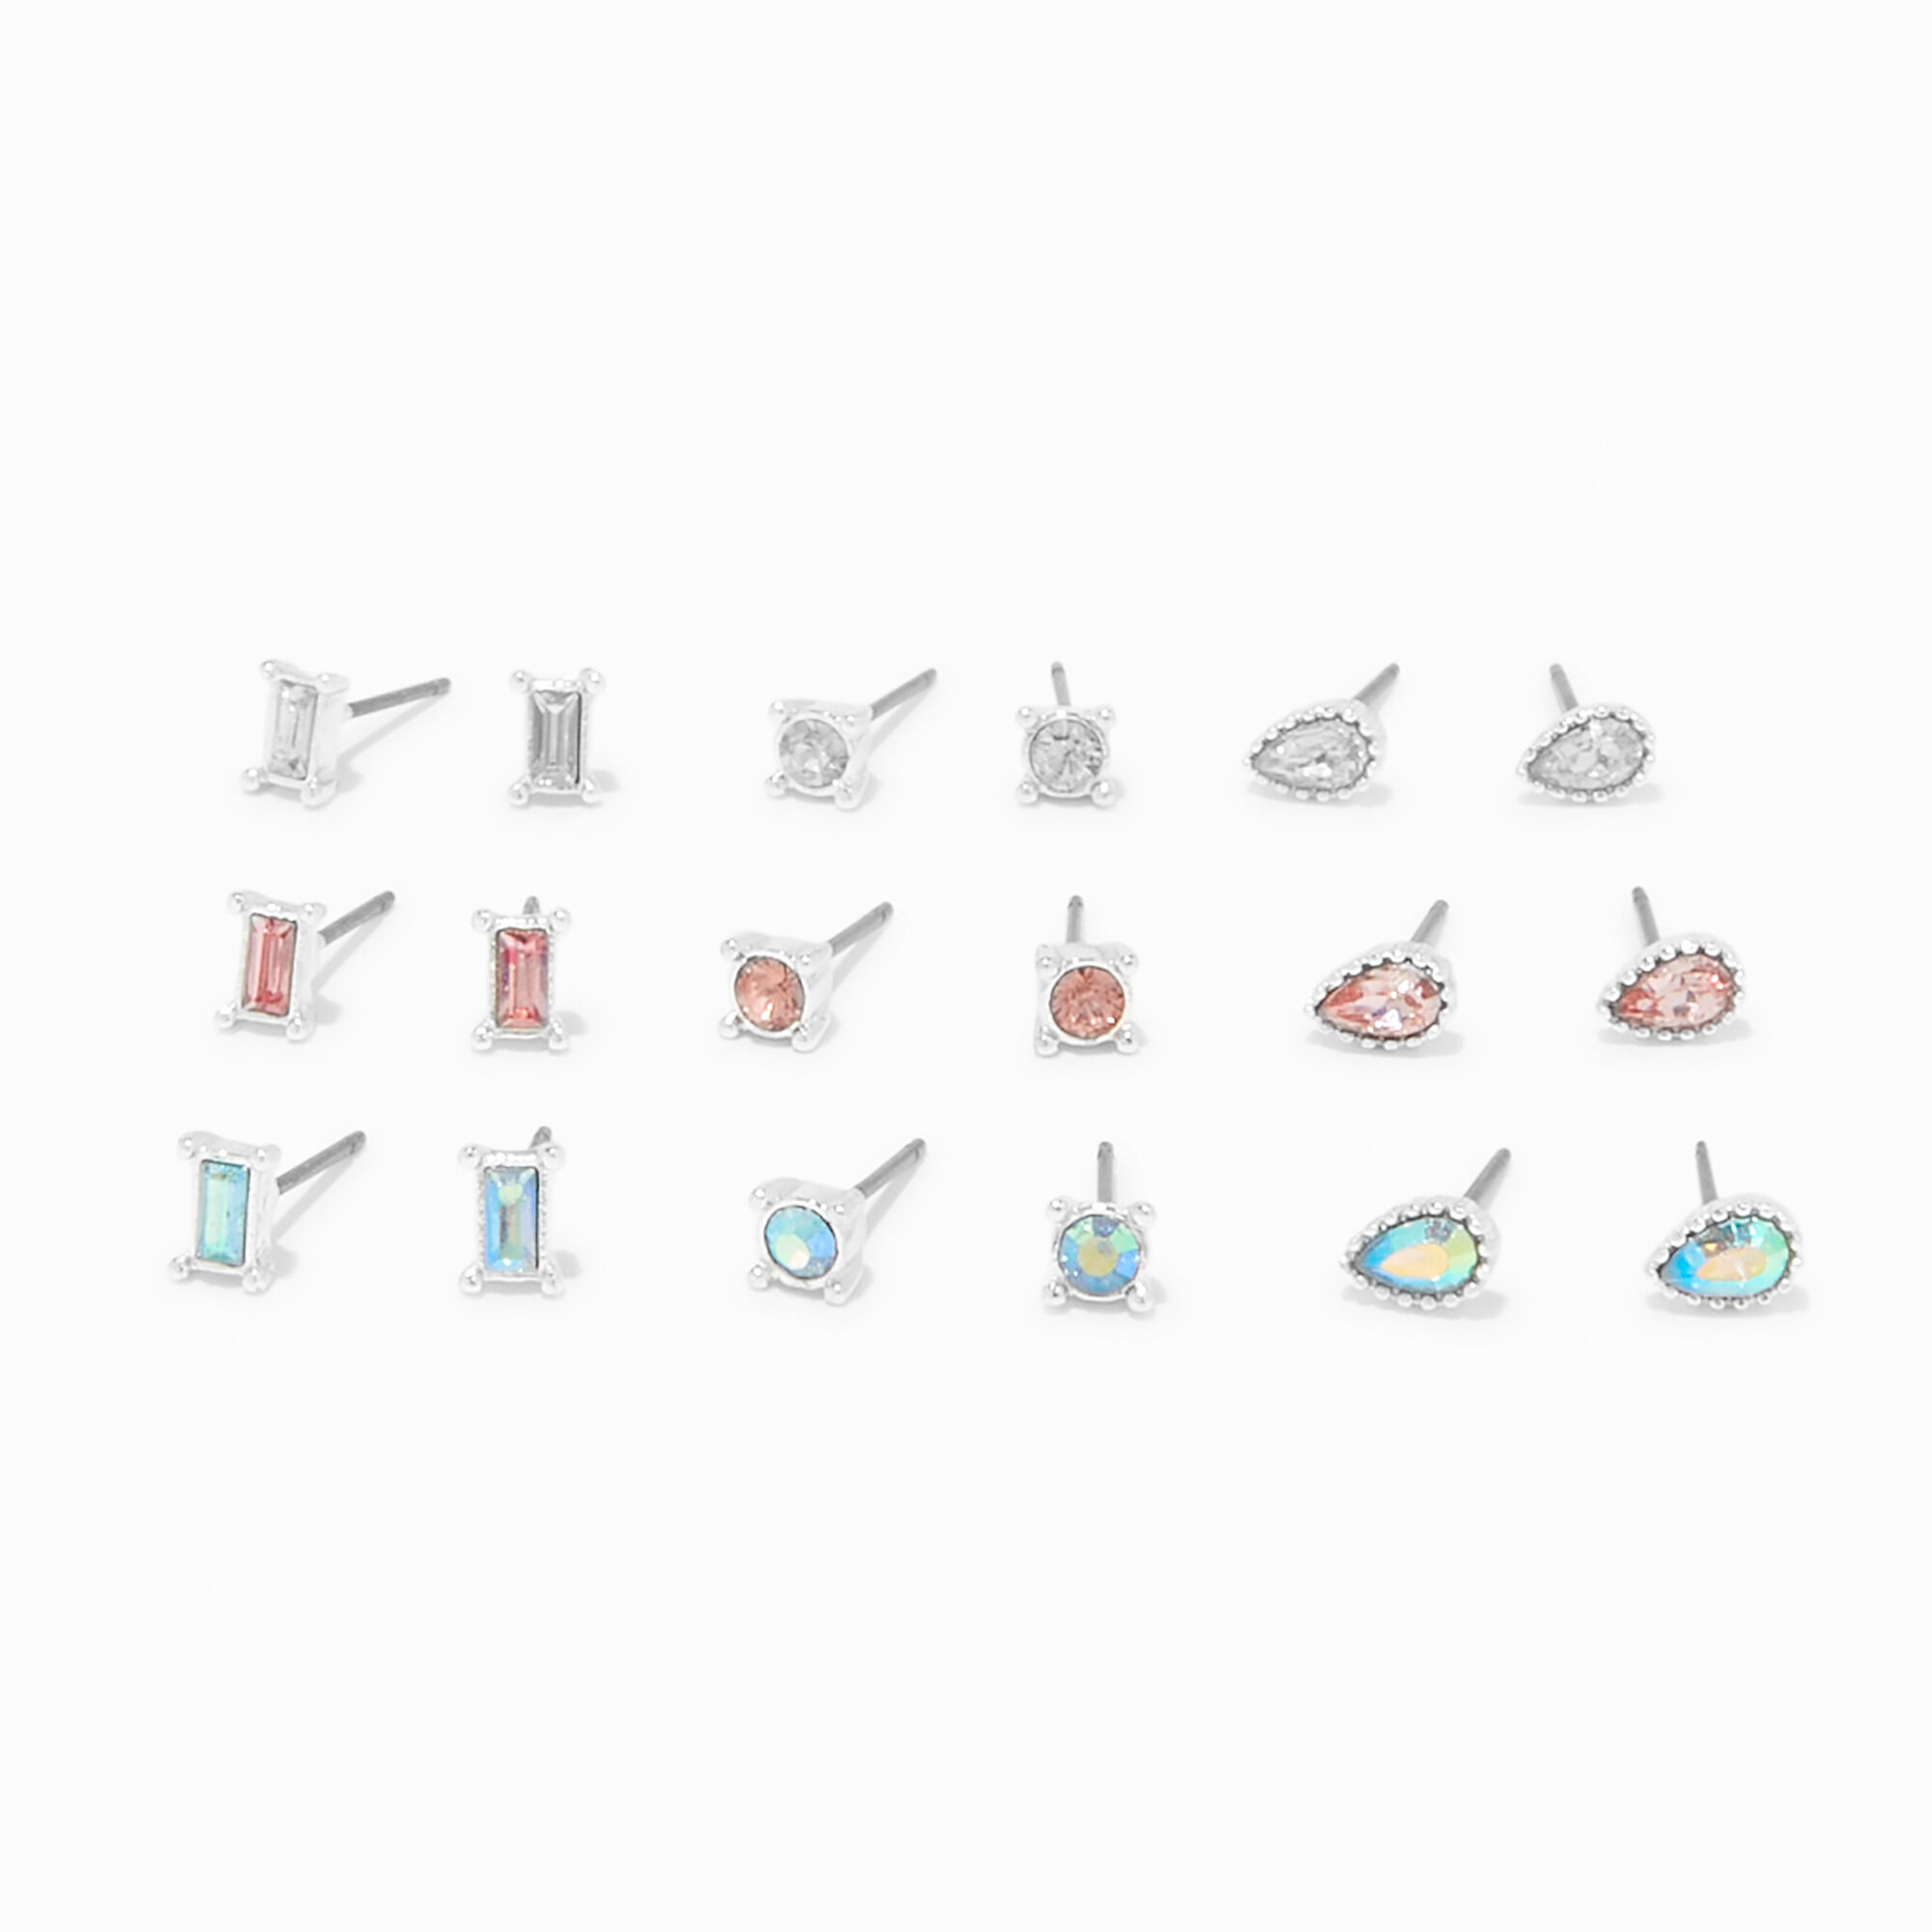 View Claires Mixed Crystal Tone Stud Earrings 9 Pack Silver information